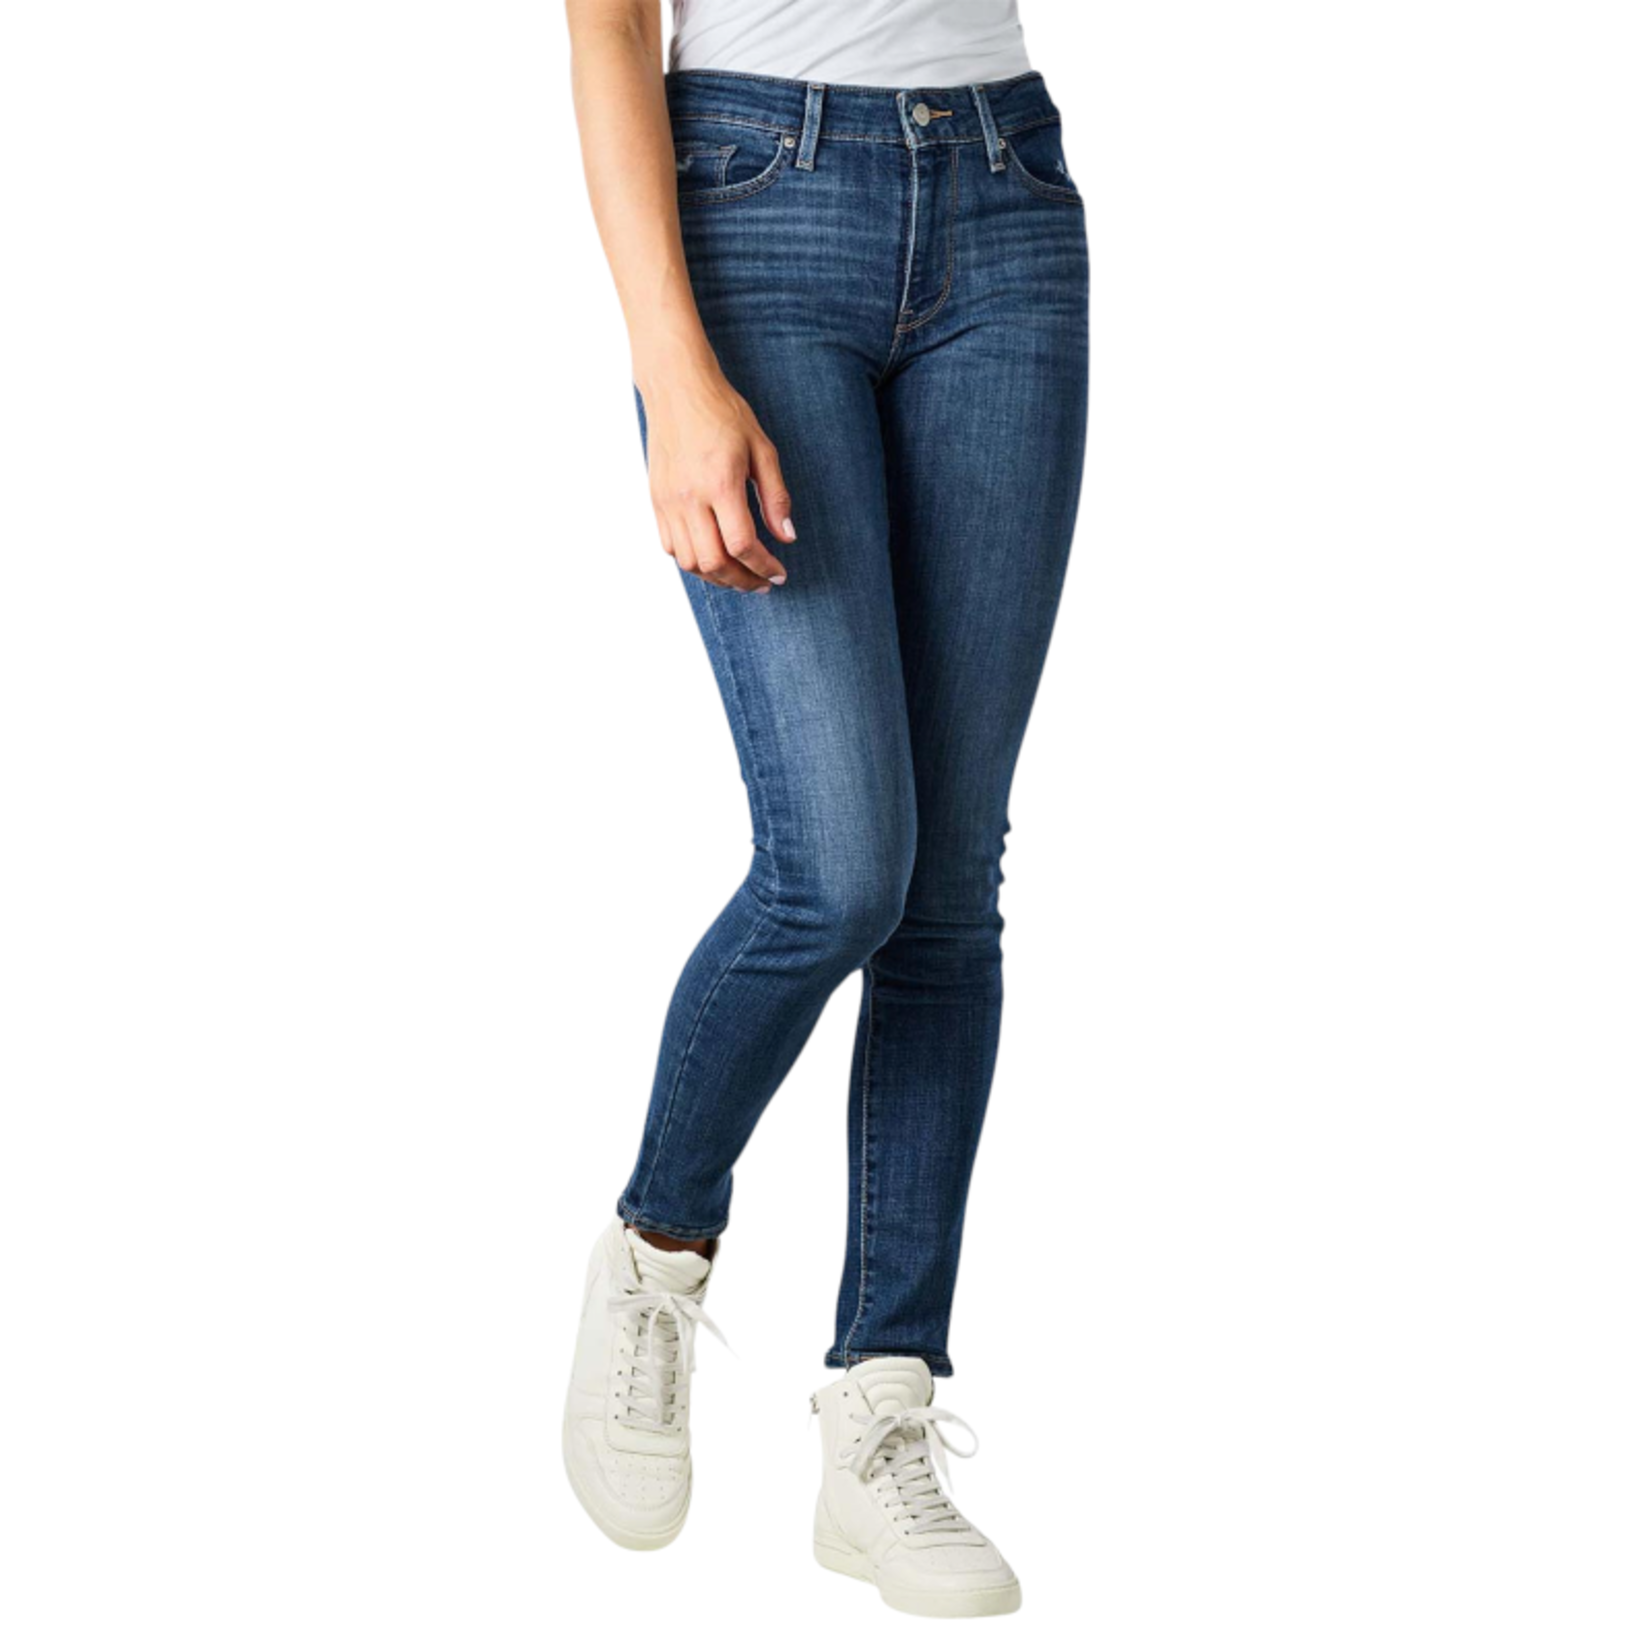 LEVI'S 711 SKINNY MID RISE JEAN 18881-0633 - Michael's and Jody's